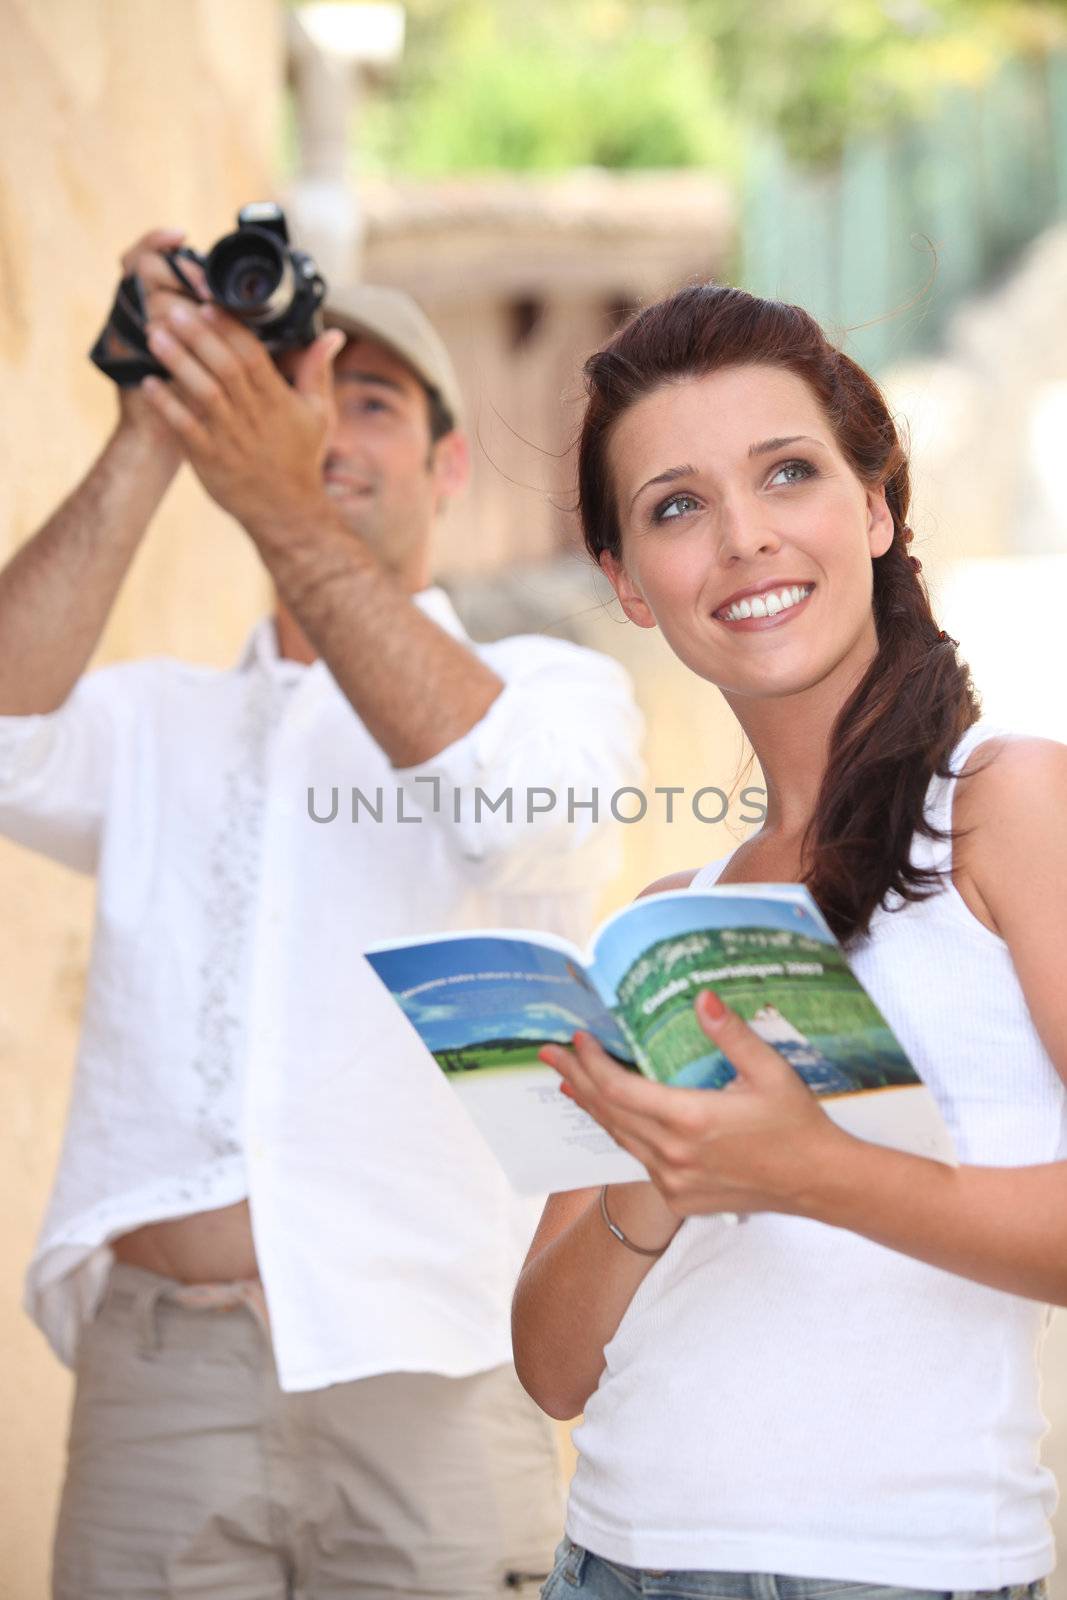 Tourists with camera and travel guide